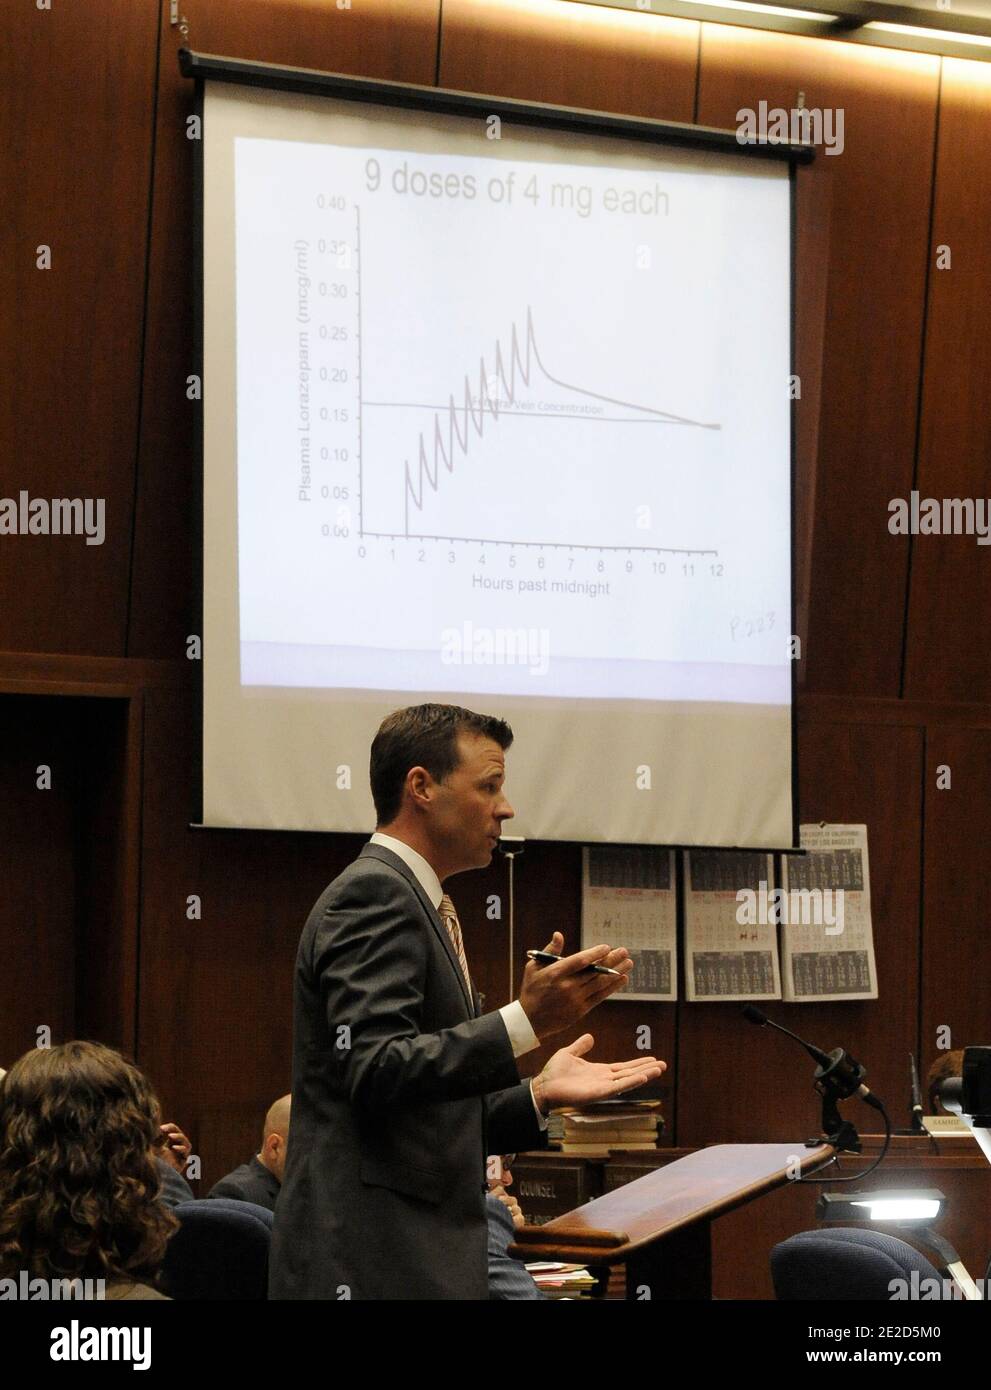 A chart showing propofol injections is displayed as Deputy District Attorney David Walgren questions propofol expert Dr. Steven Shafer (not pictured) during the Dr. Conrad Murray trial in Los Angeles Superior Court in Los Angeles, California, USA on 24 October 2011. Murray has pleaded not guilty and faces four years in prison and the loss of his medical licenses if convicted of involuntary manslaughter in Michael Jackson's death. Photo by Paul Buck/Pool/ABACAPRESS.COM Stock Photo